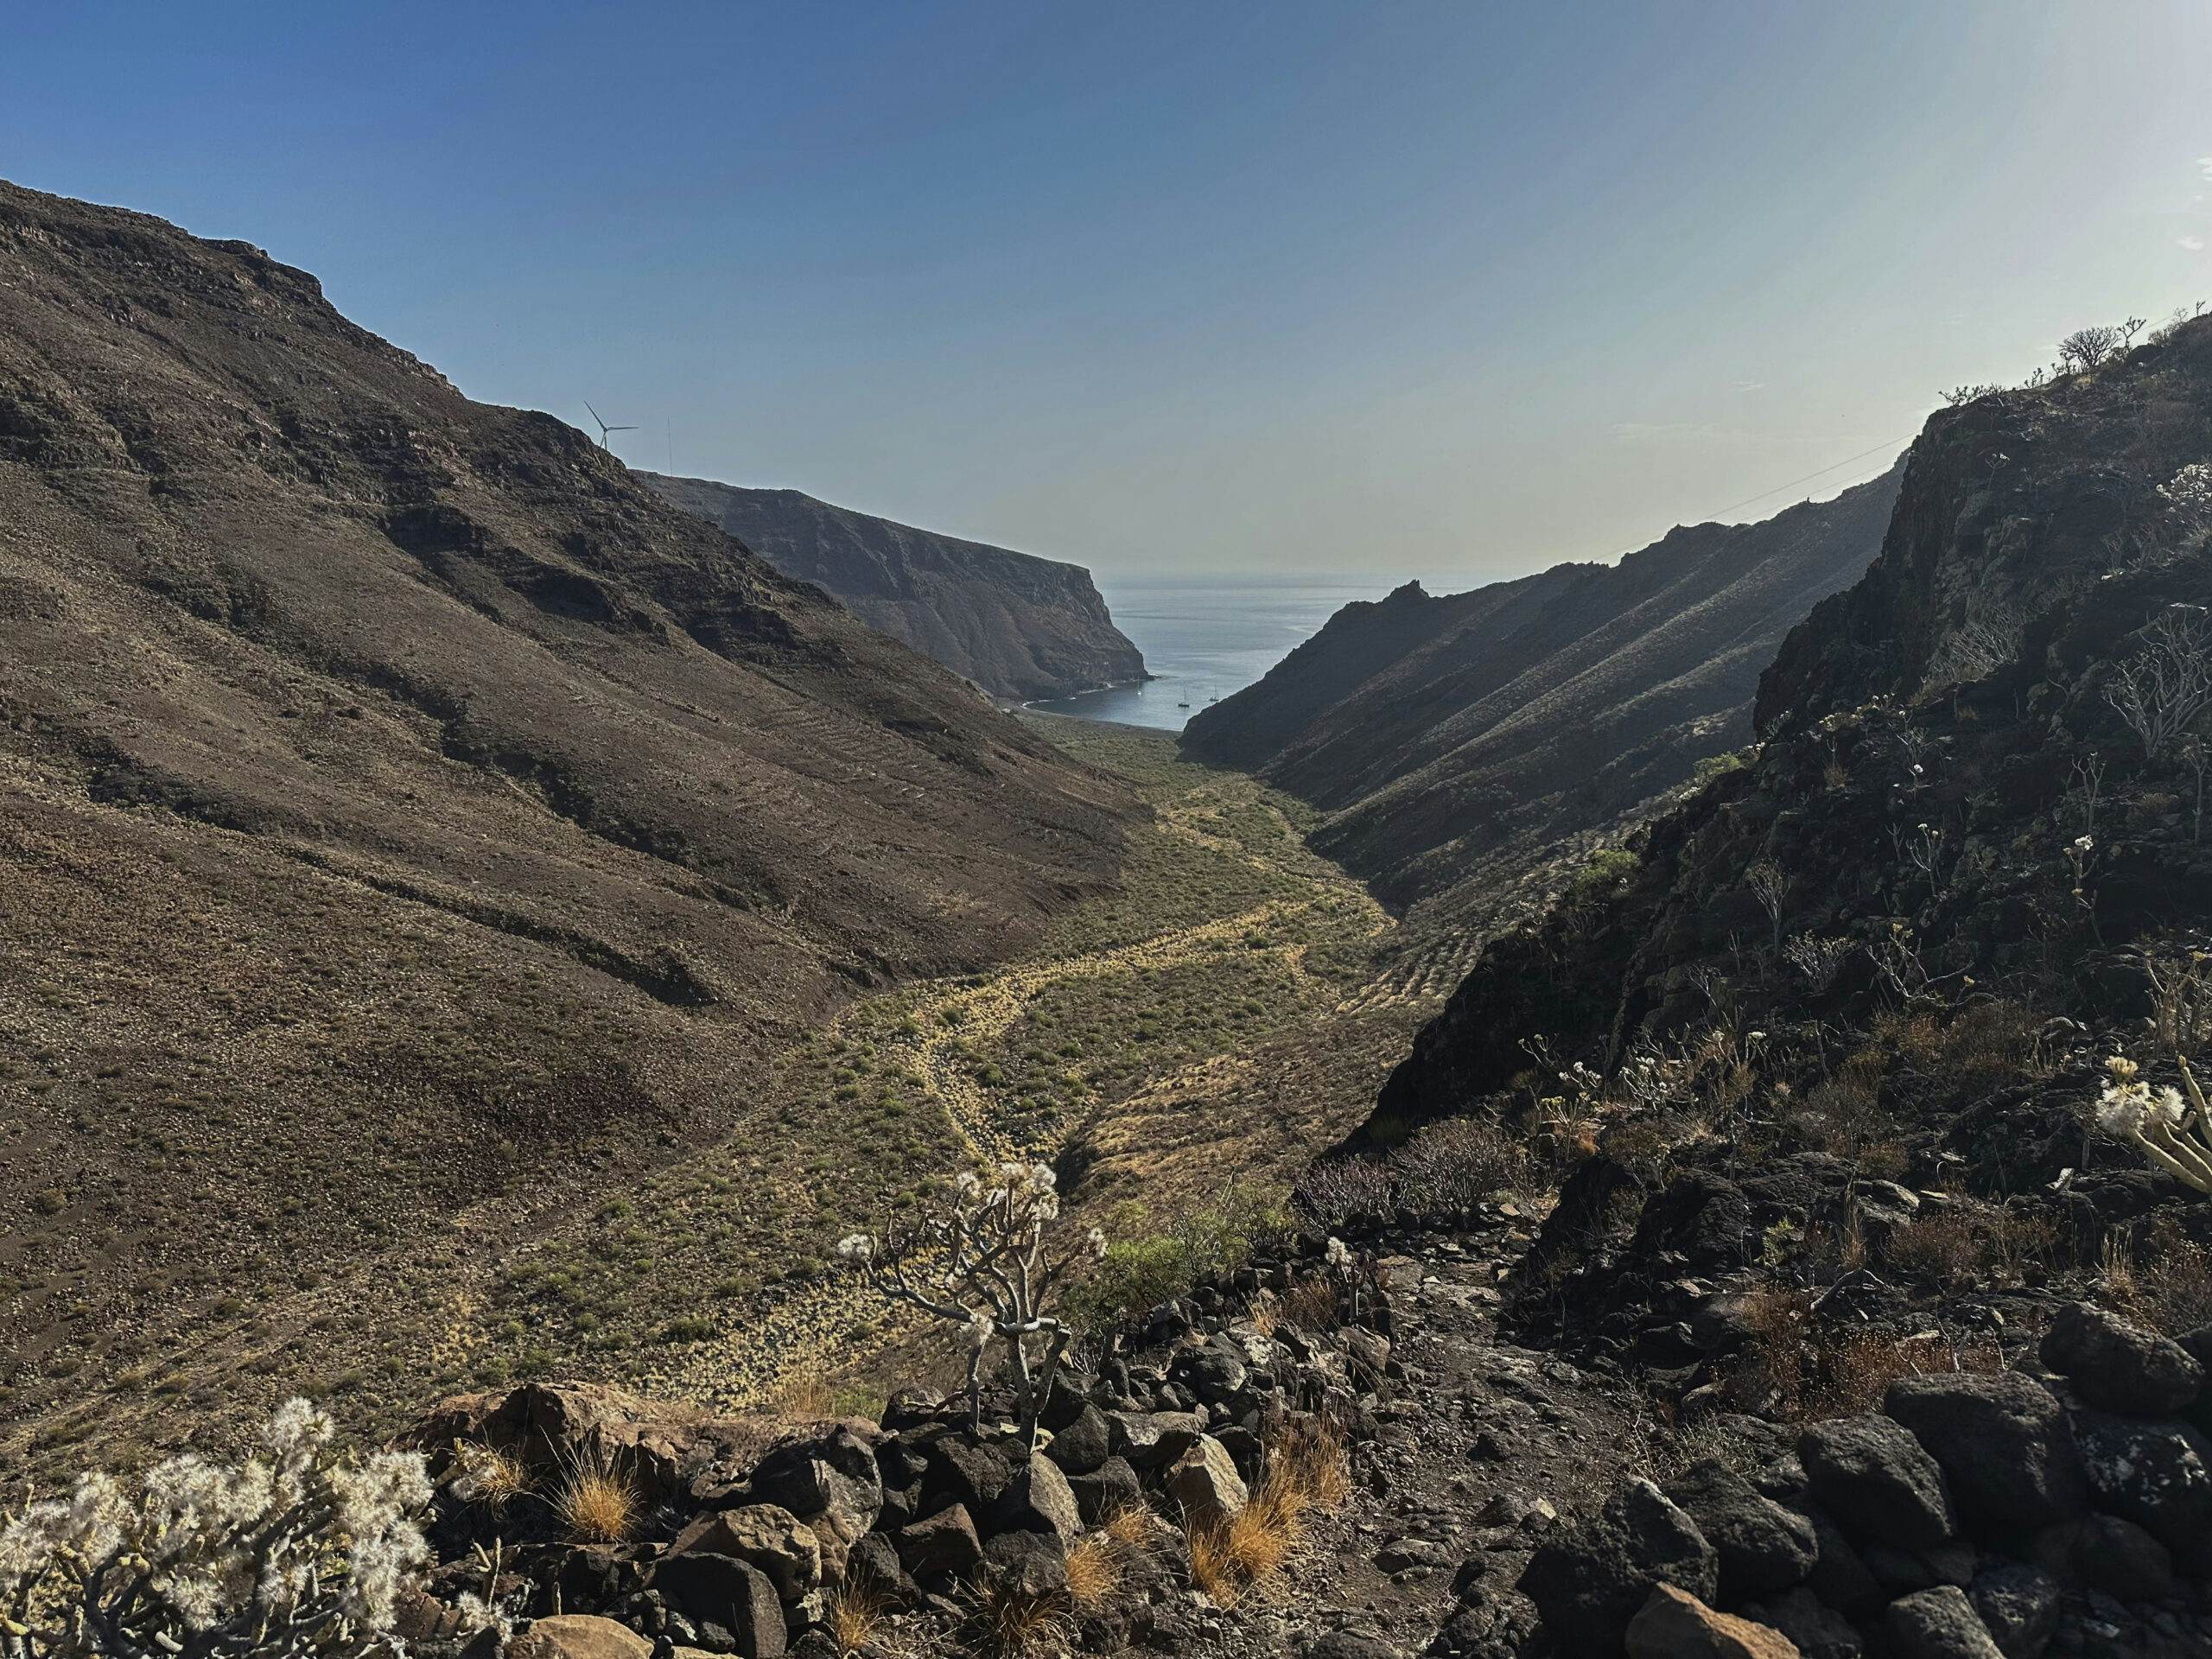 View from the steep ascent path over the Barranco de La Guancha to the ridge